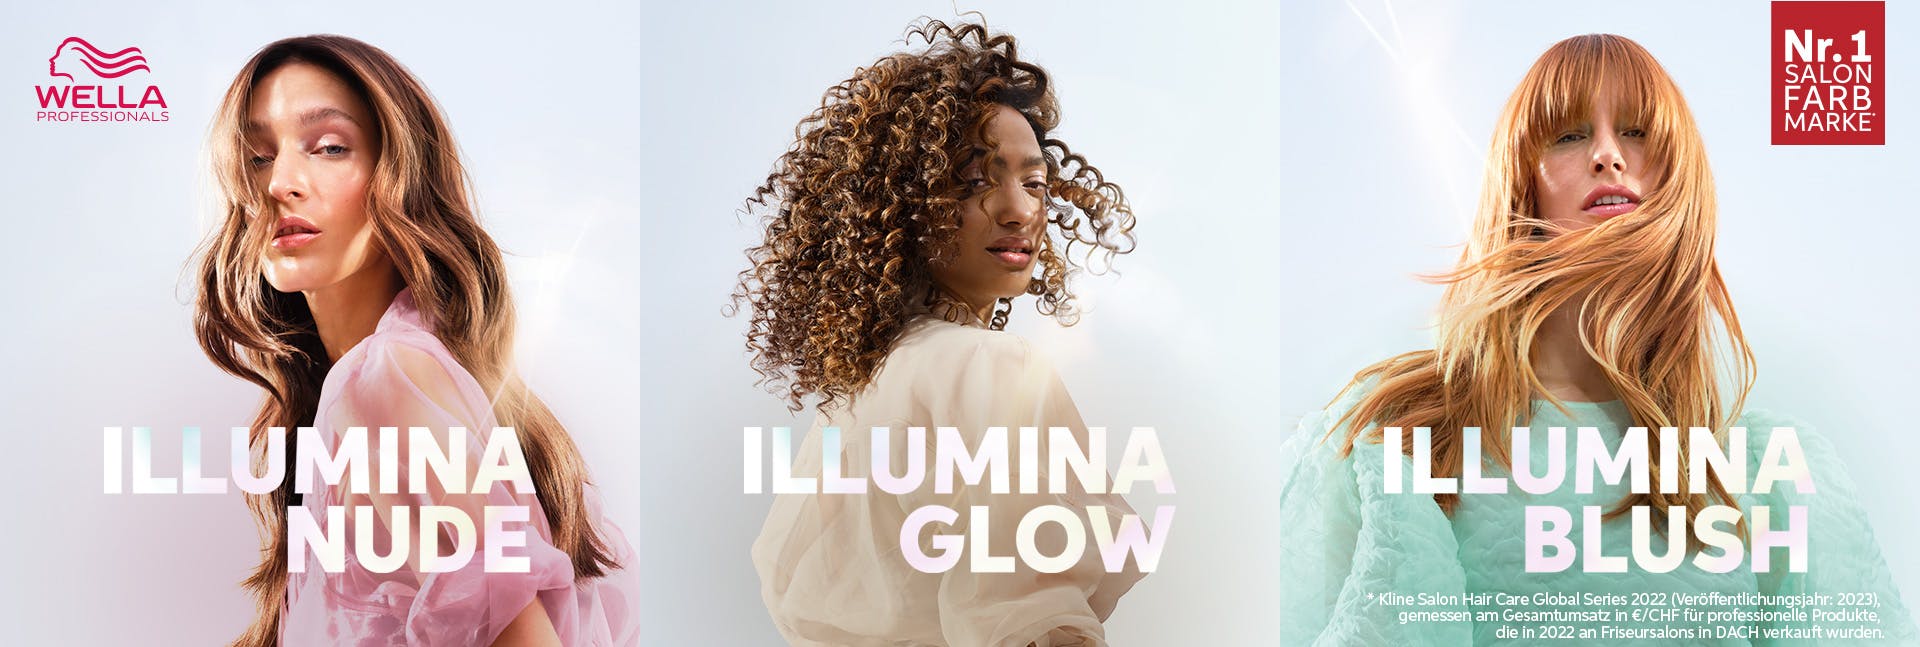 Three glamorous models showcasing their breathtaking looks with the incredible results of Illumina's natural hair color.